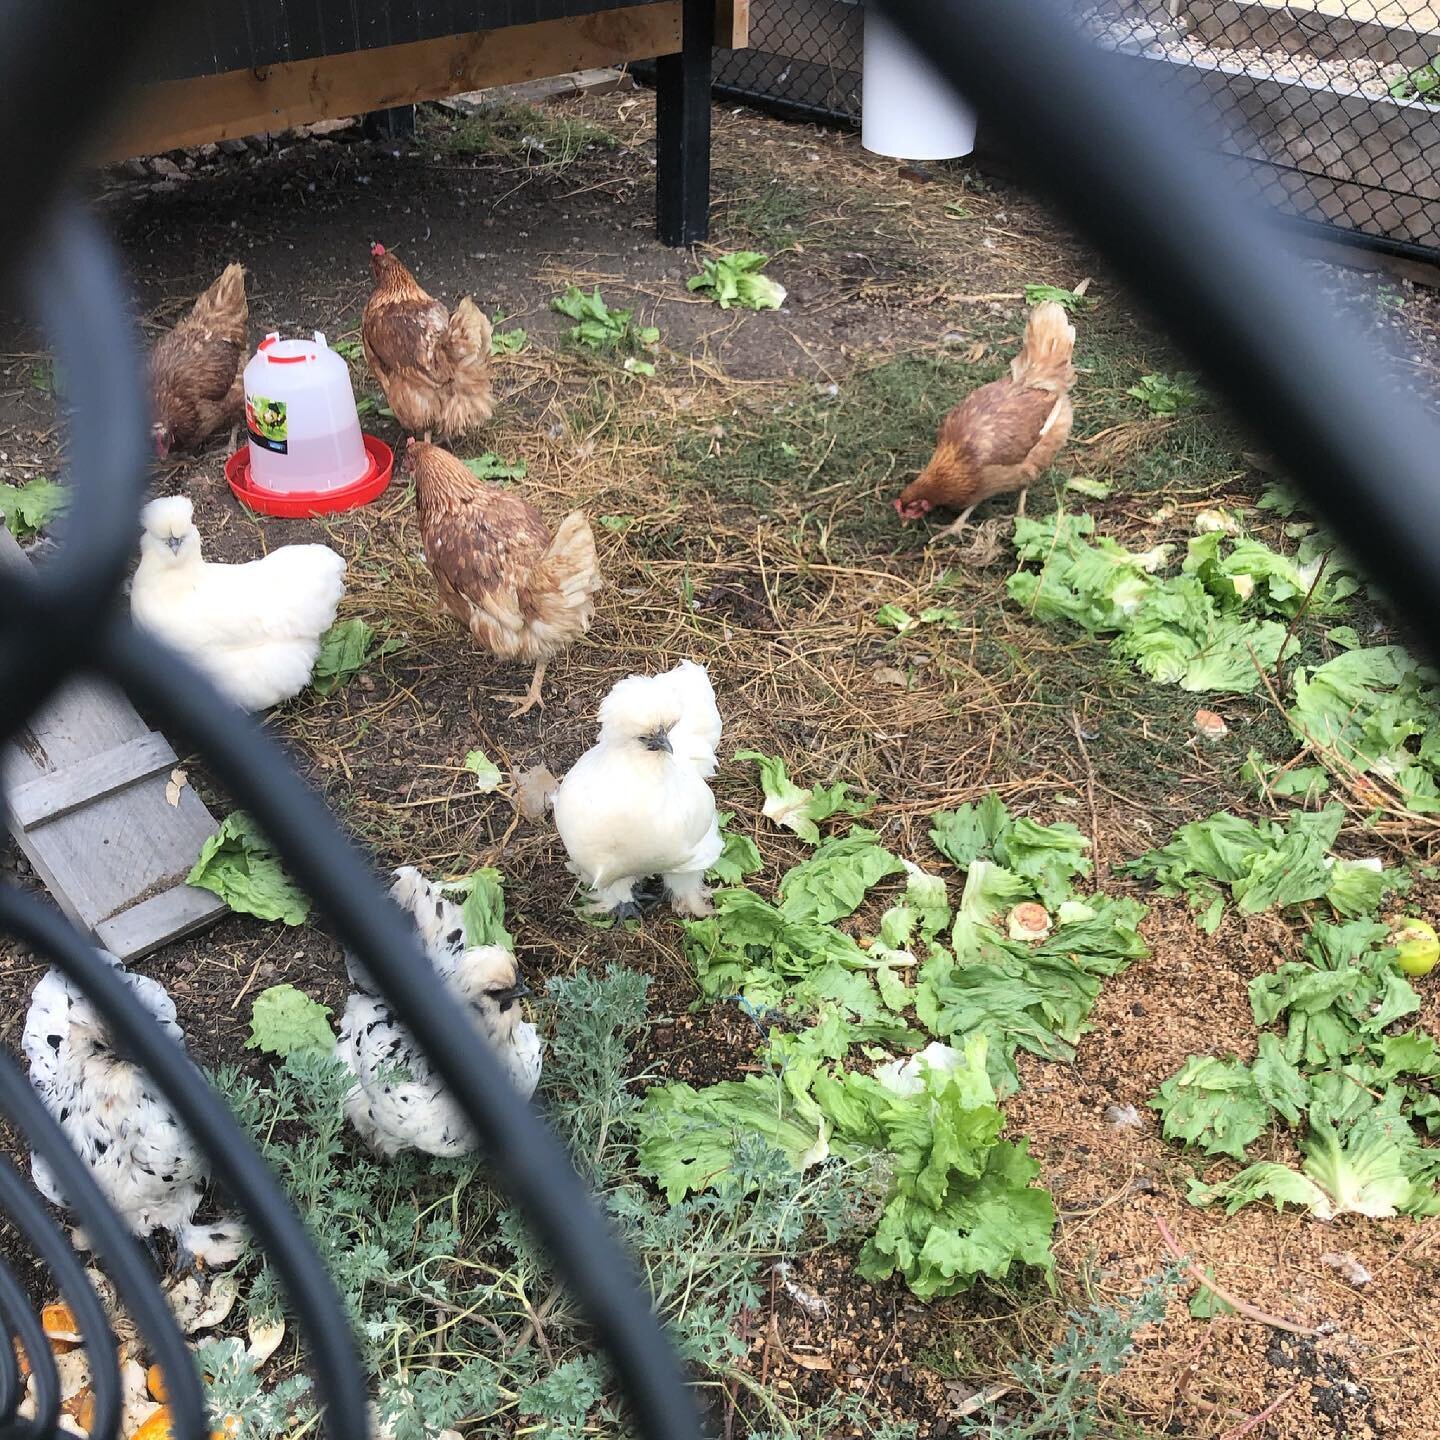 🐥Life is good if you are a chicken living at Seed!!🐥

Our girls have one of the best locations in town! Views of Lake Guthridge and close to the swimming pool and tennis courts. Not to mention lots of garden/veggie scraps to feast on!

Have you bee